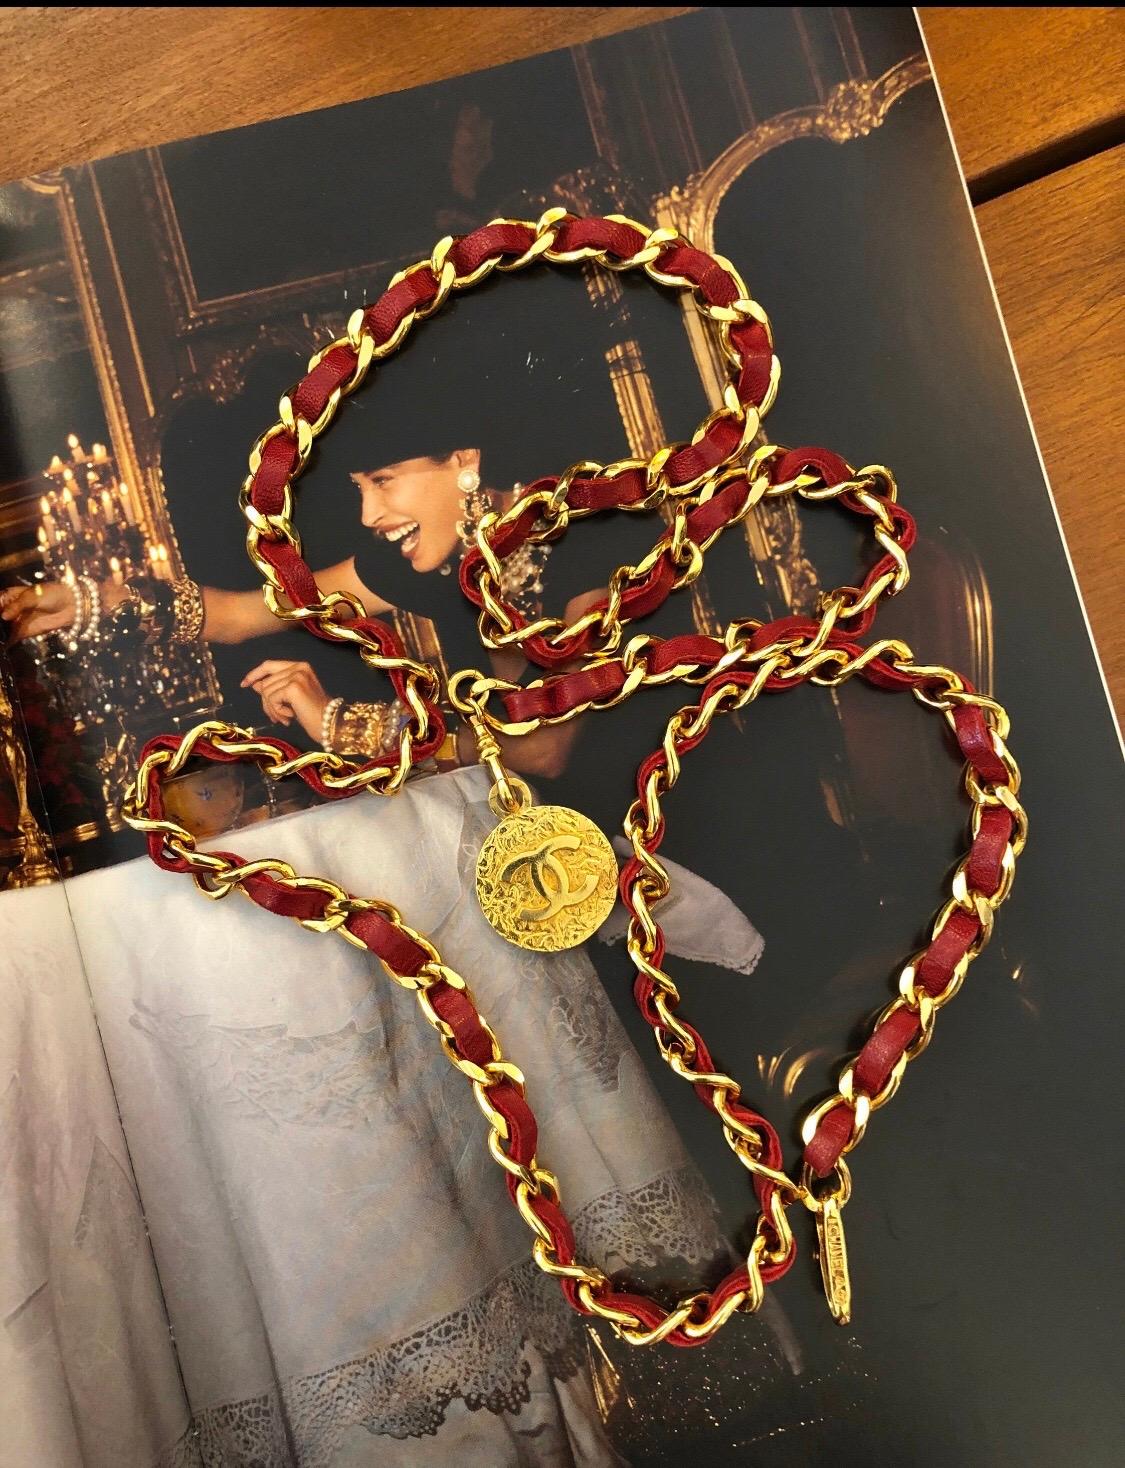 This authentic Chanel leather chain belt is in excellent. Gone toned chain interlaced with red leather featuring a CC coin at one end. Fits waist upto 37 inches. Adjustable hook fastening. It can be worn as a belt or a multi-layered necklace.